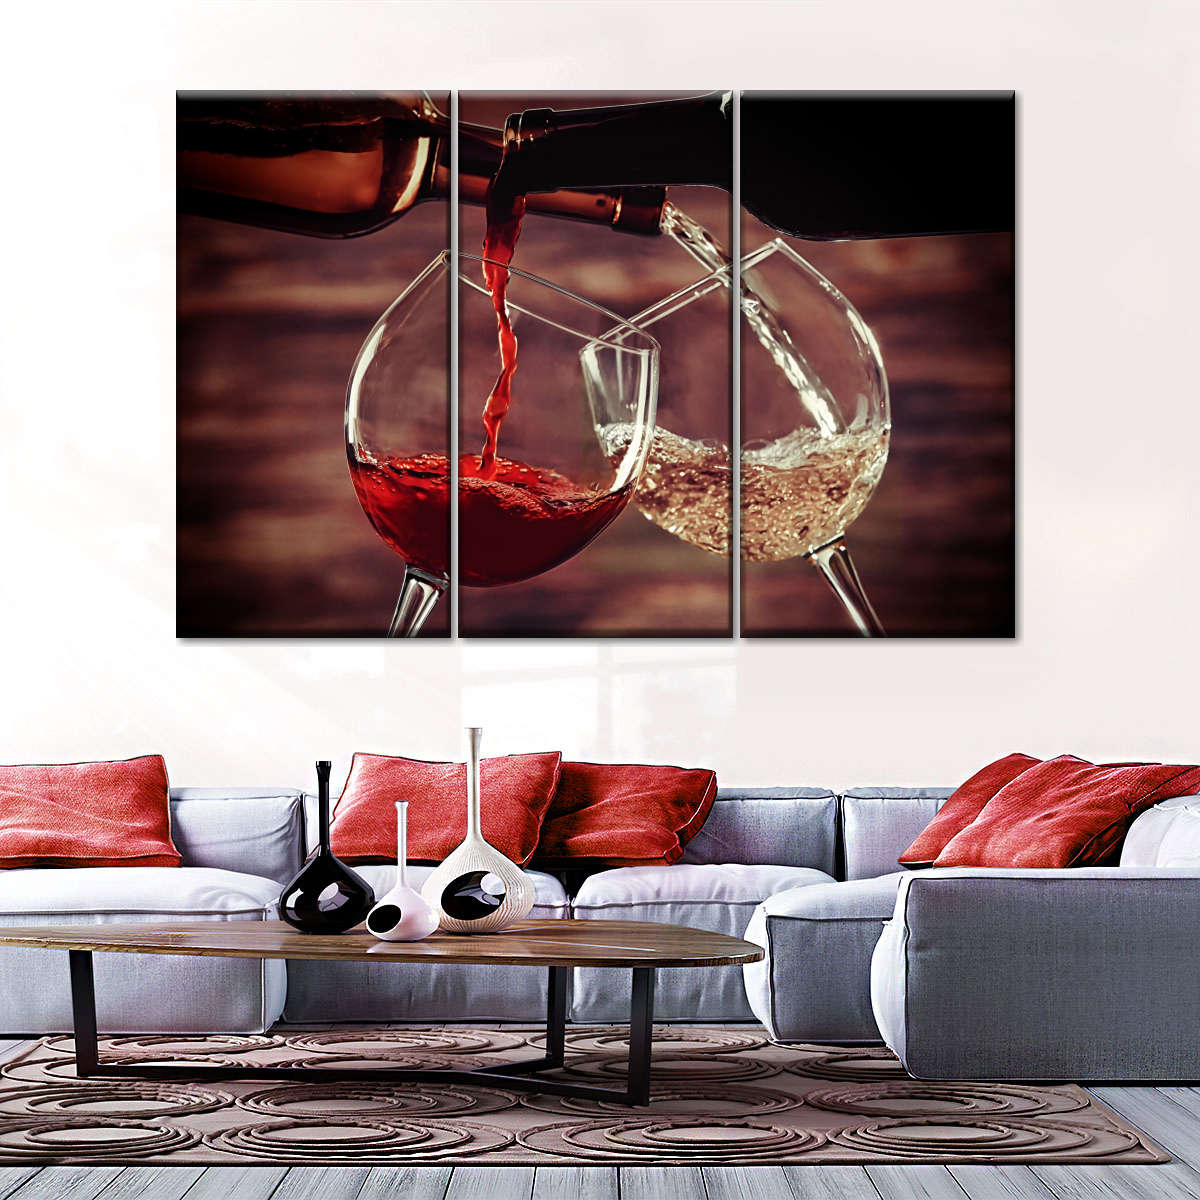 Pouring Red And White Wine Wall Art: Canvas Prints, Art Prints & Framed ...